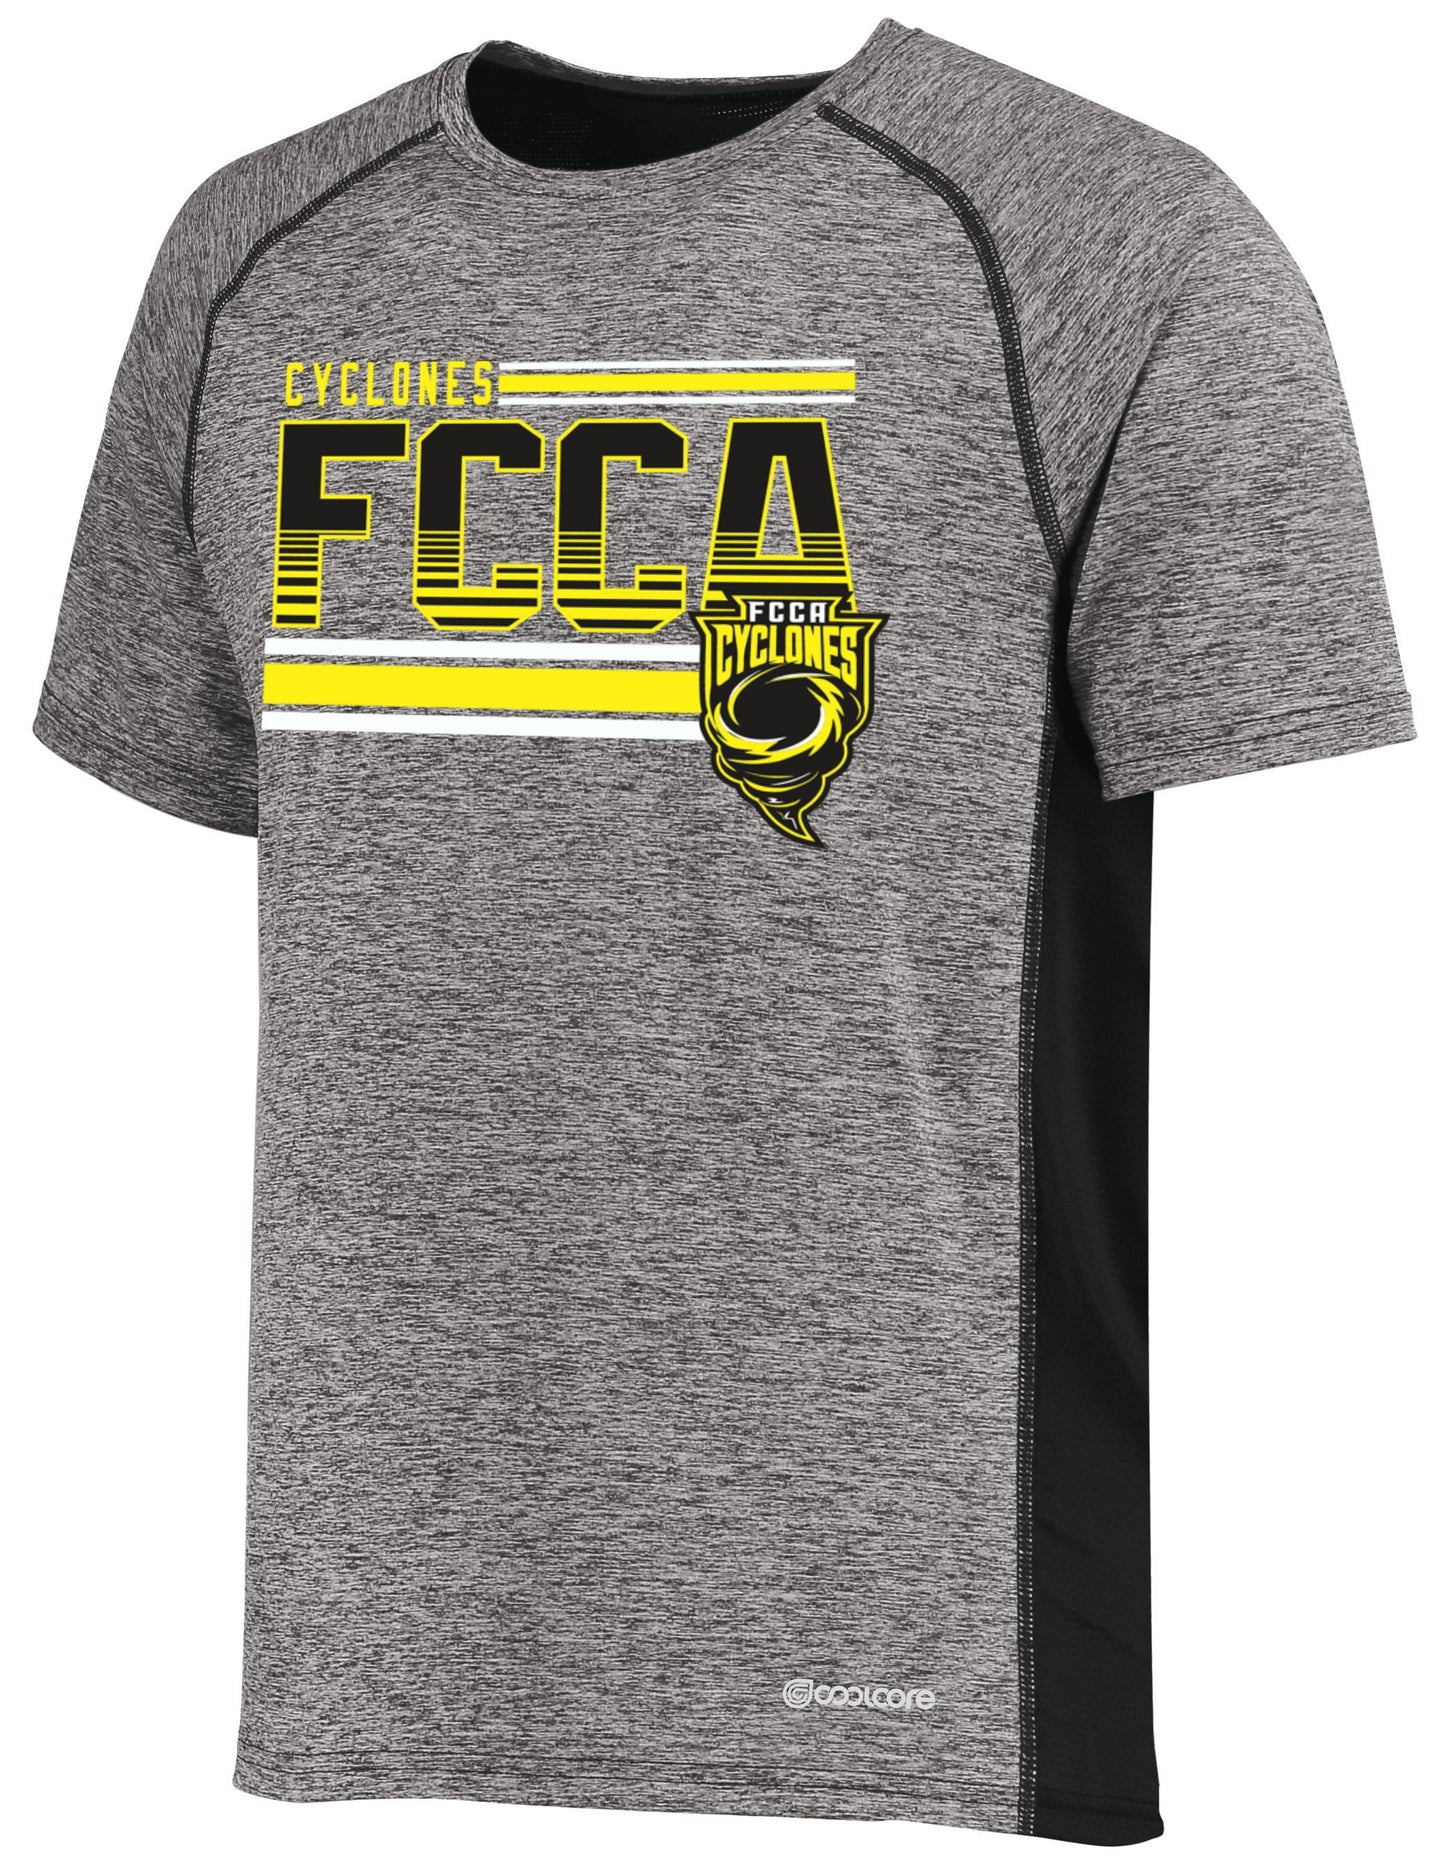 FCCA "Lines" CoolCore Performance T shirt